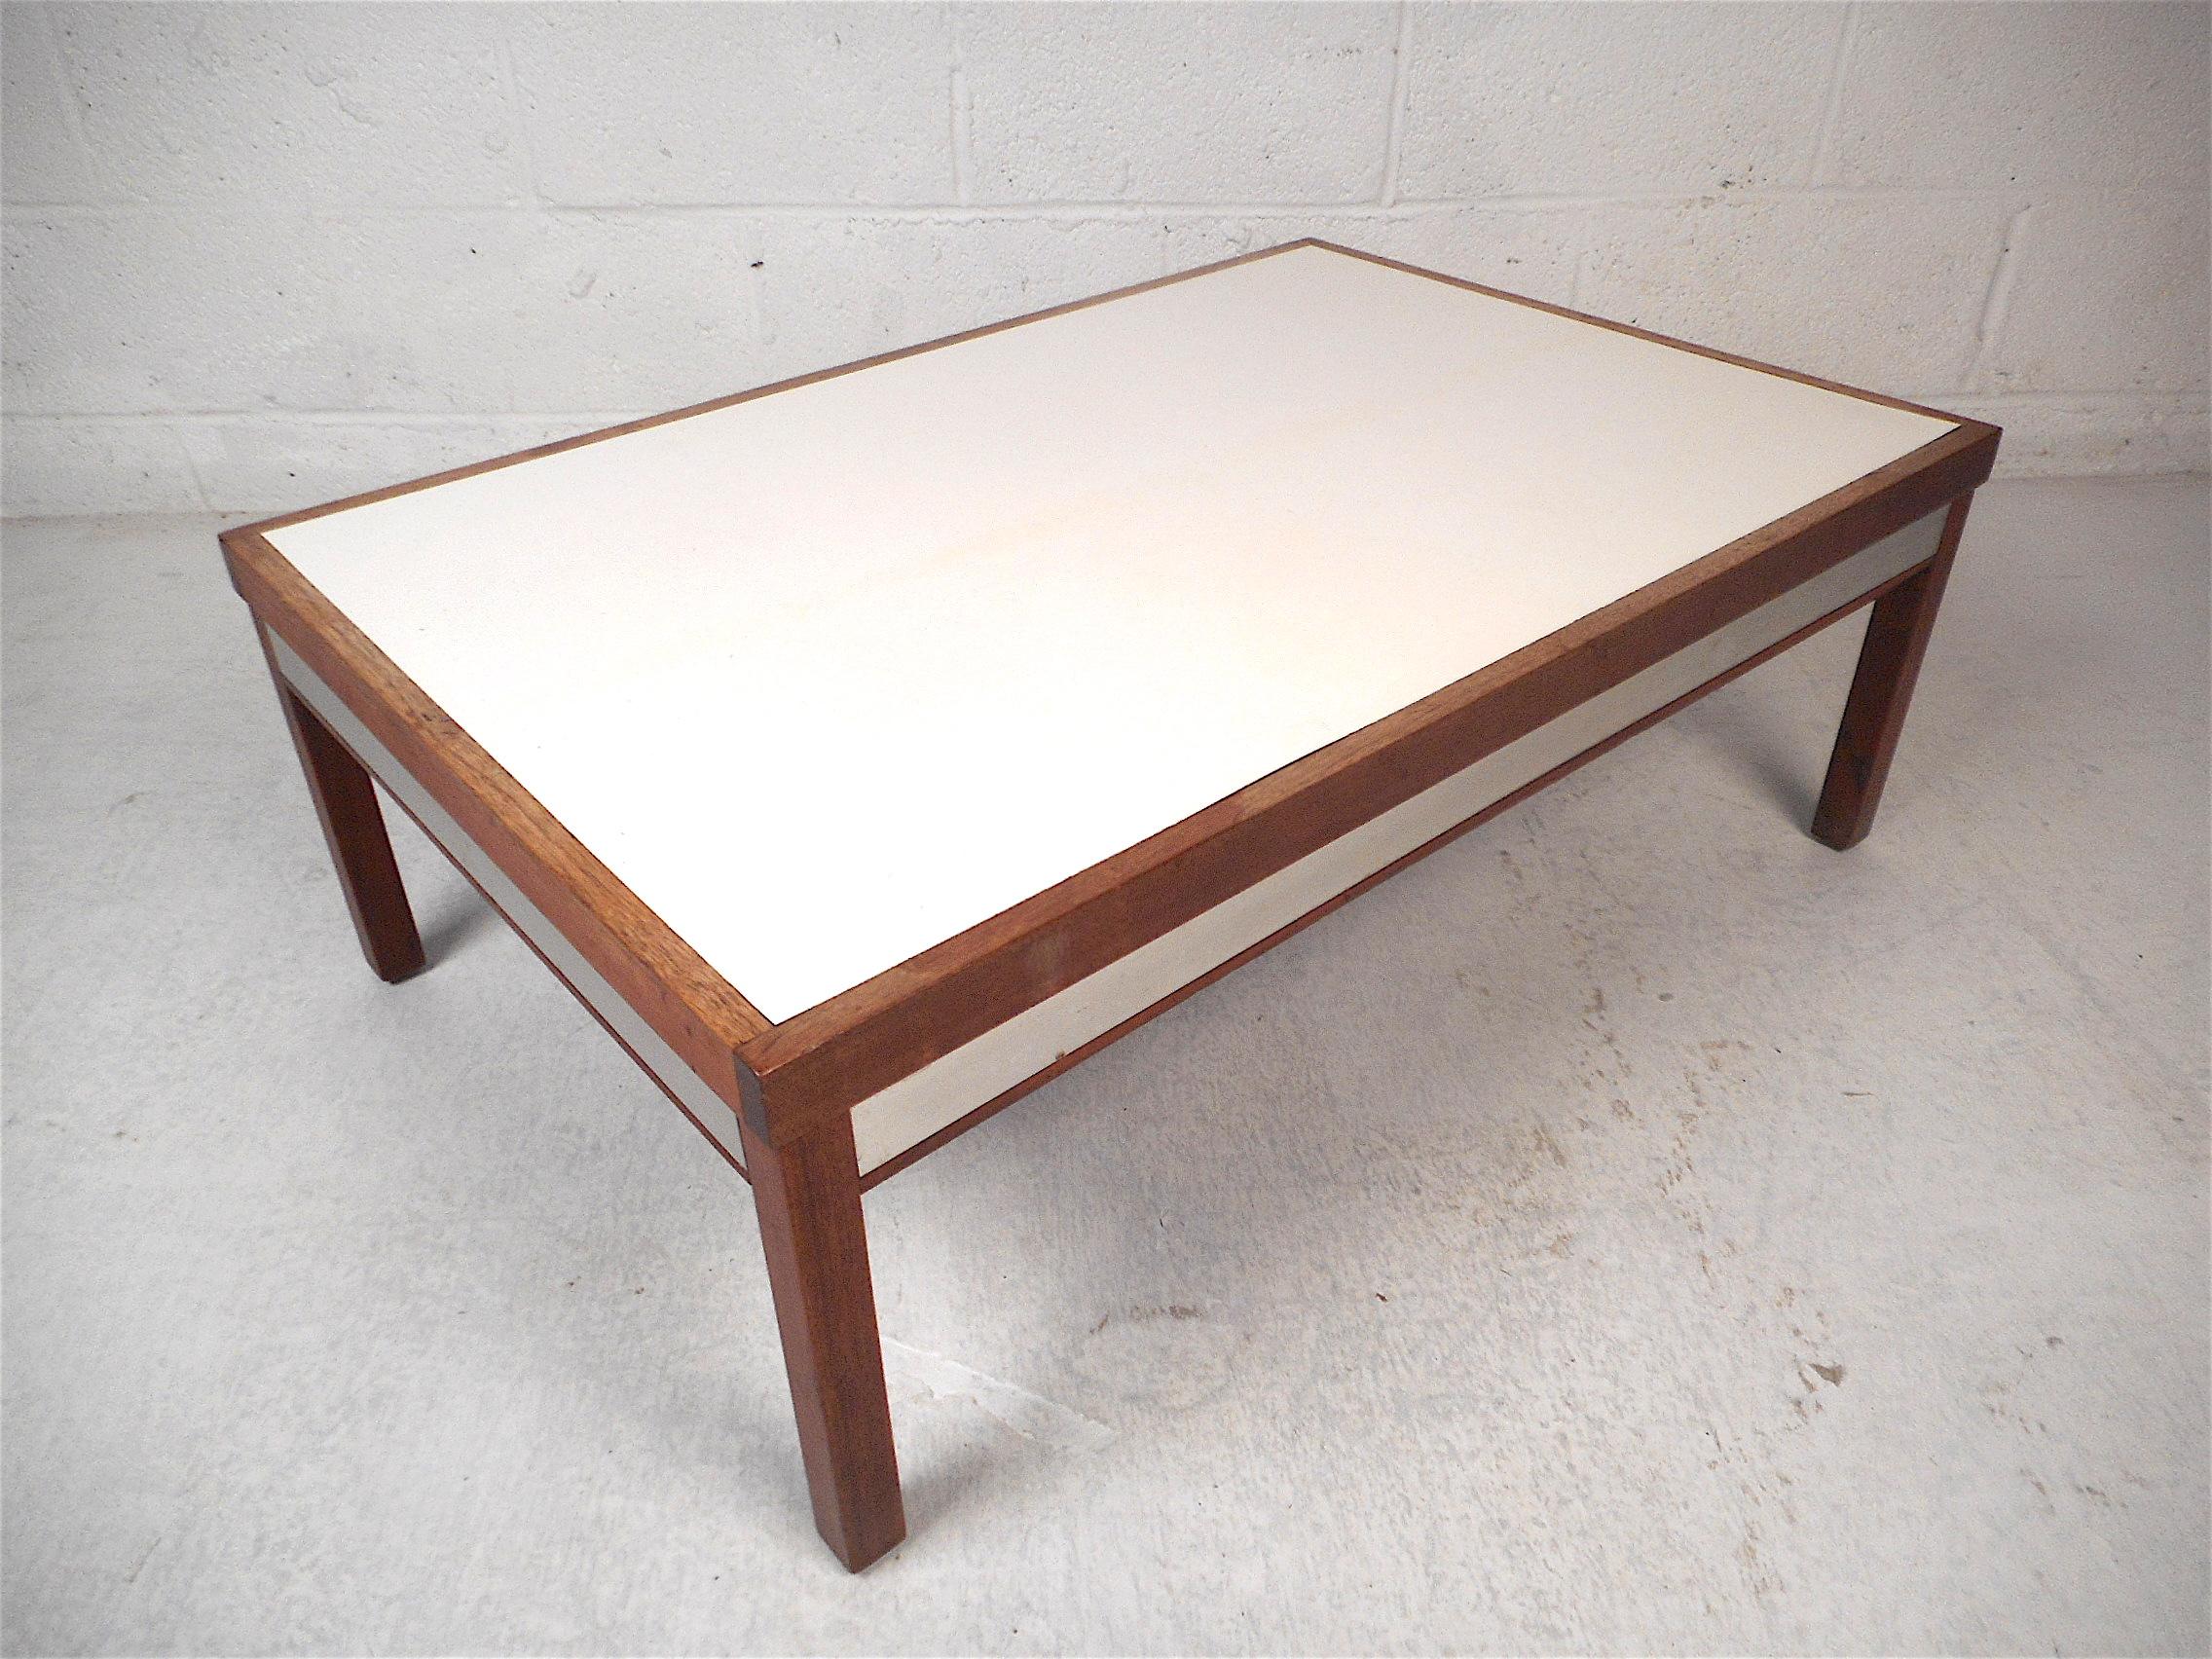 Interesting midcentury coffee table, white laminate table surface, metal trim on the sides, along with a sturdy wooden frame. A compact table perfect for apartment living. This table is sure to make a great addition to any modern interior. Please